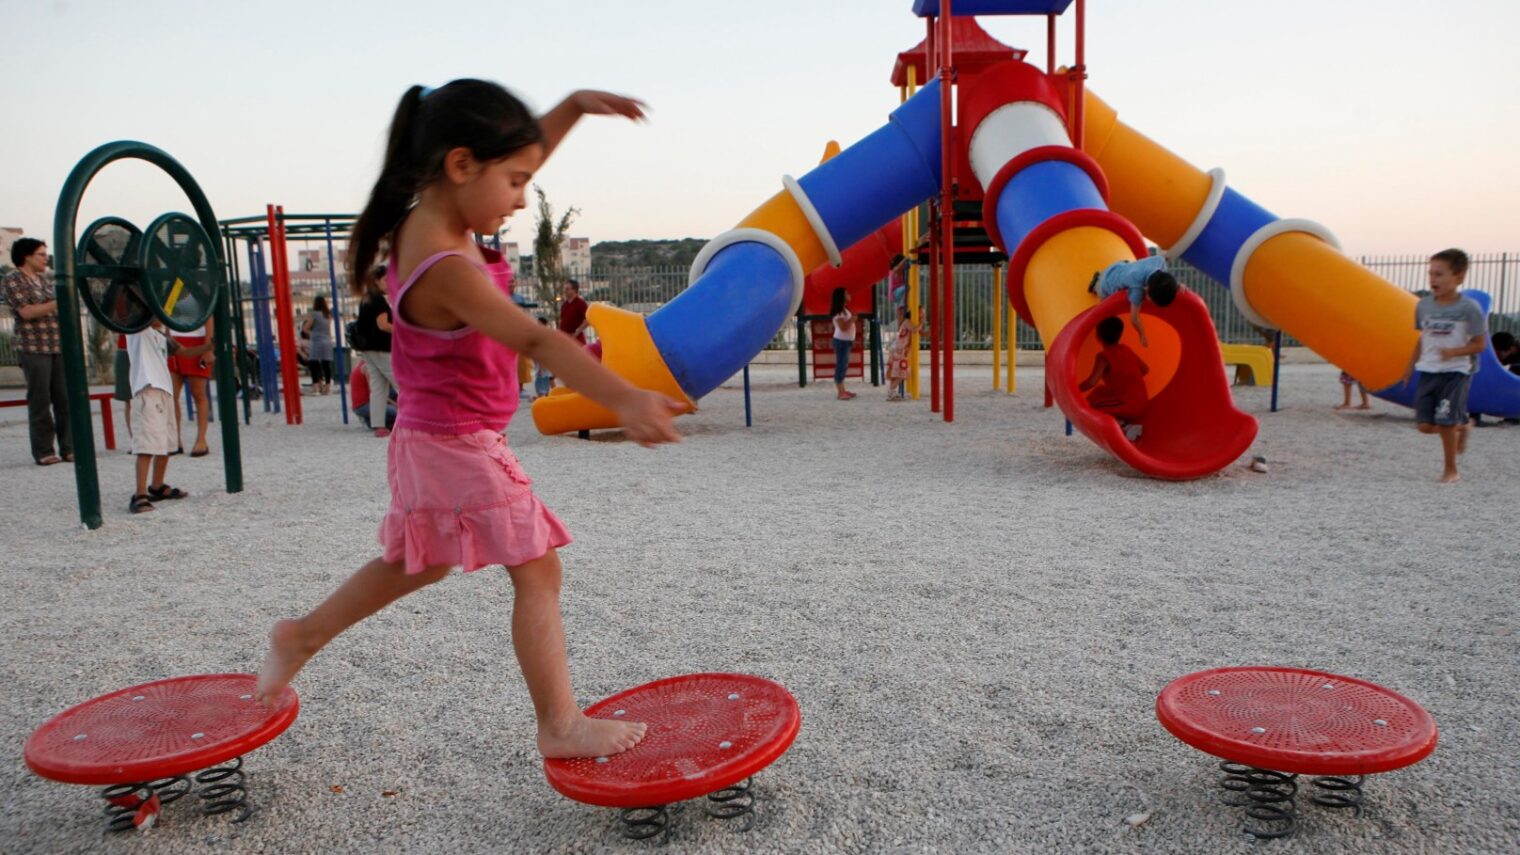 Israeli children are encouraged to play independently. Photo by Nati Shohat/FLASH90